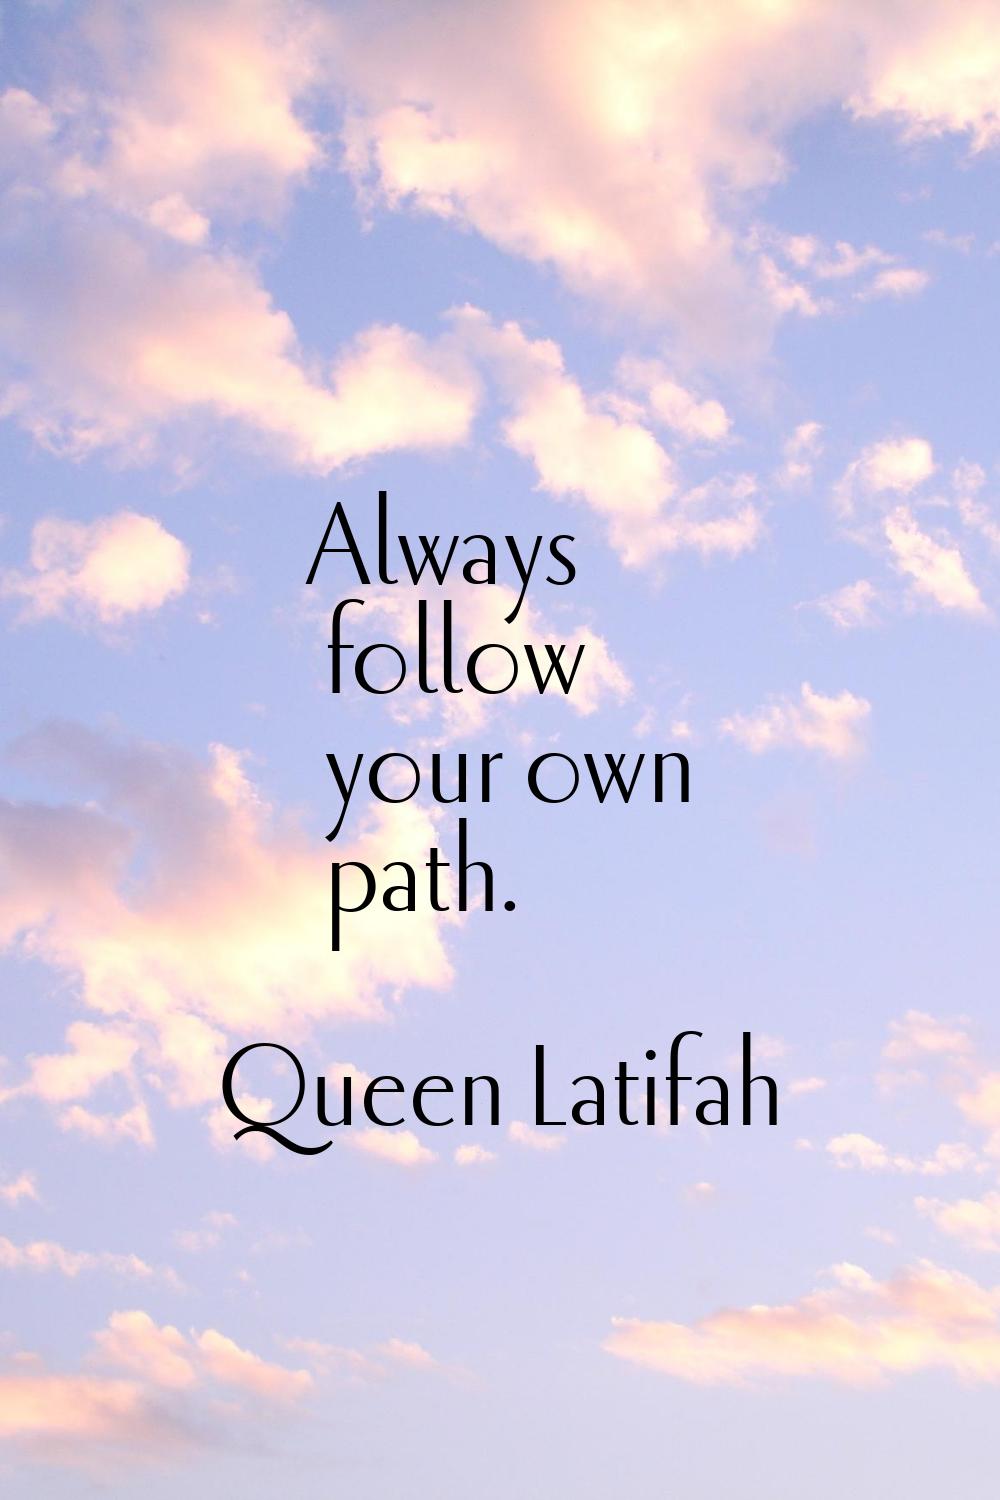 Always follow your own path.